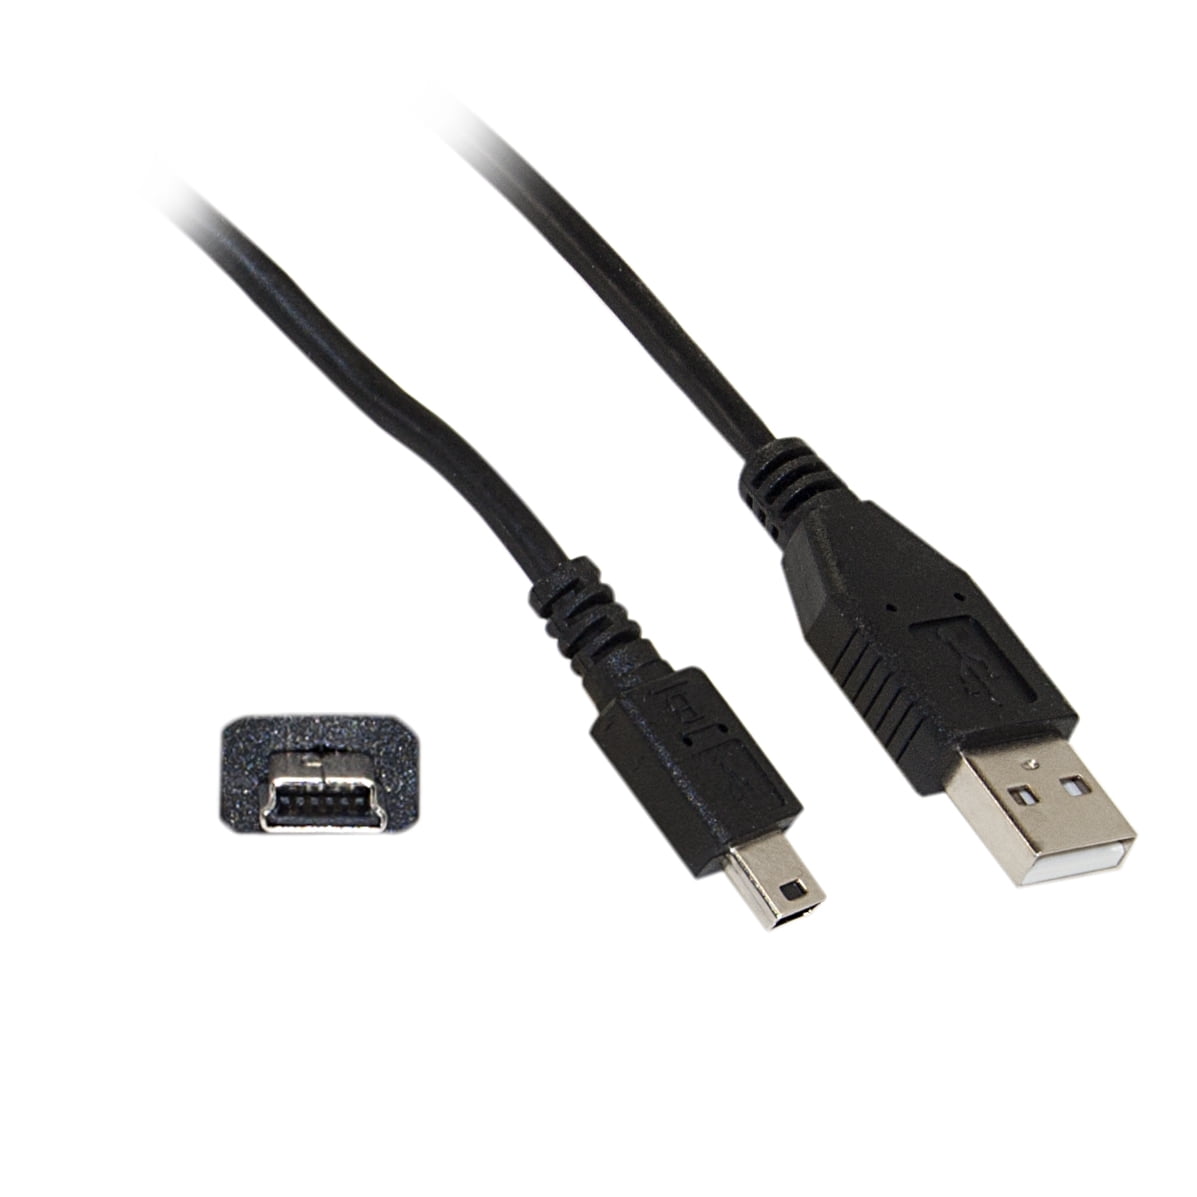 2 in 1 USB 2.0 Double A Type 2A Male to Mini 5 Pin Male Y Cable